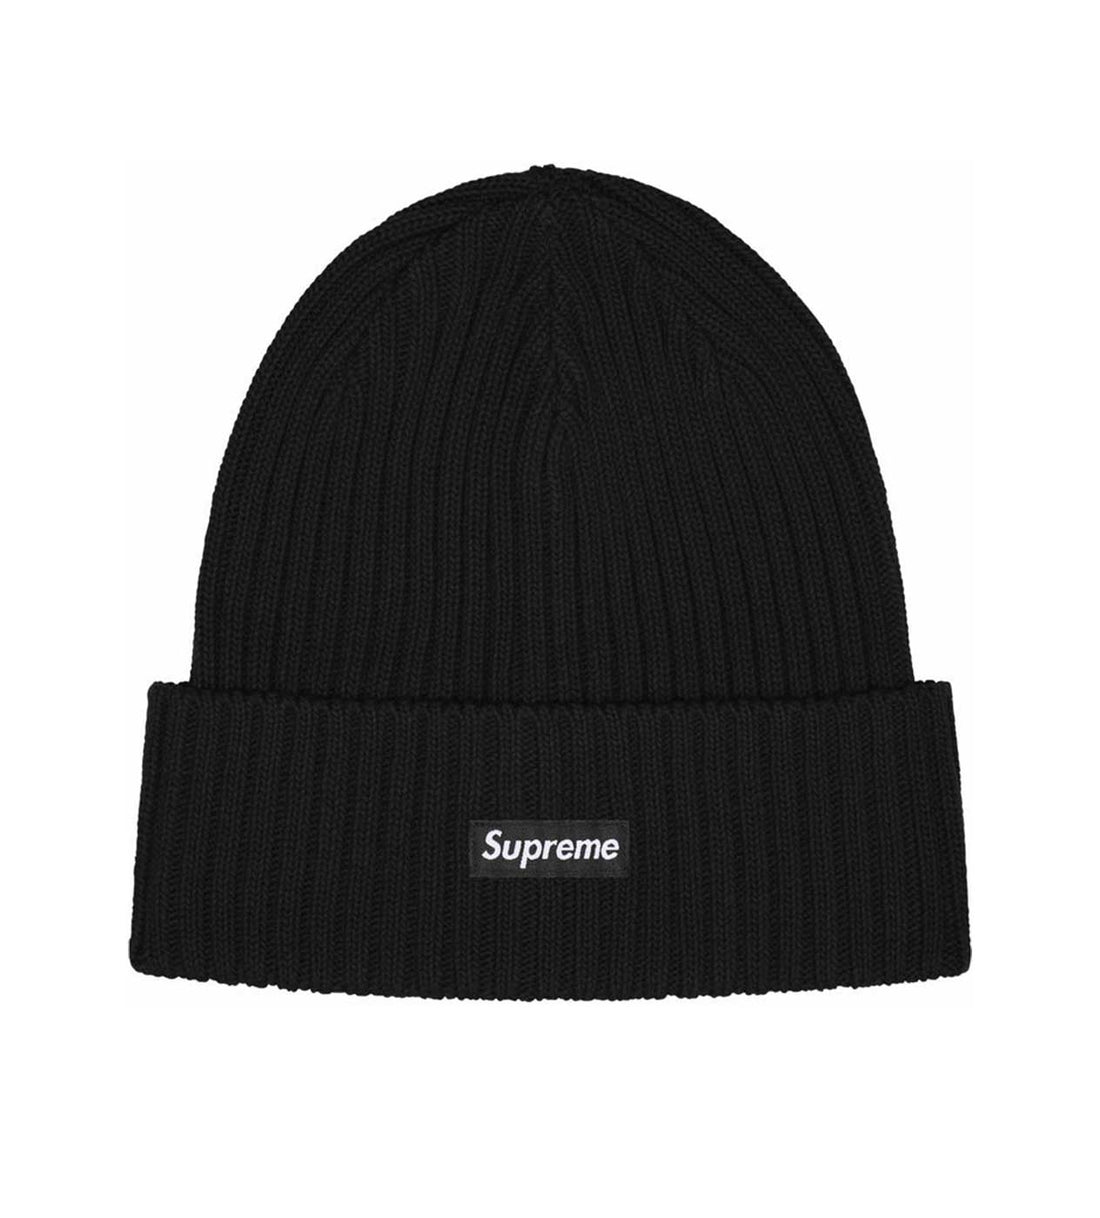 Supreme Overdyed Beanie Black front